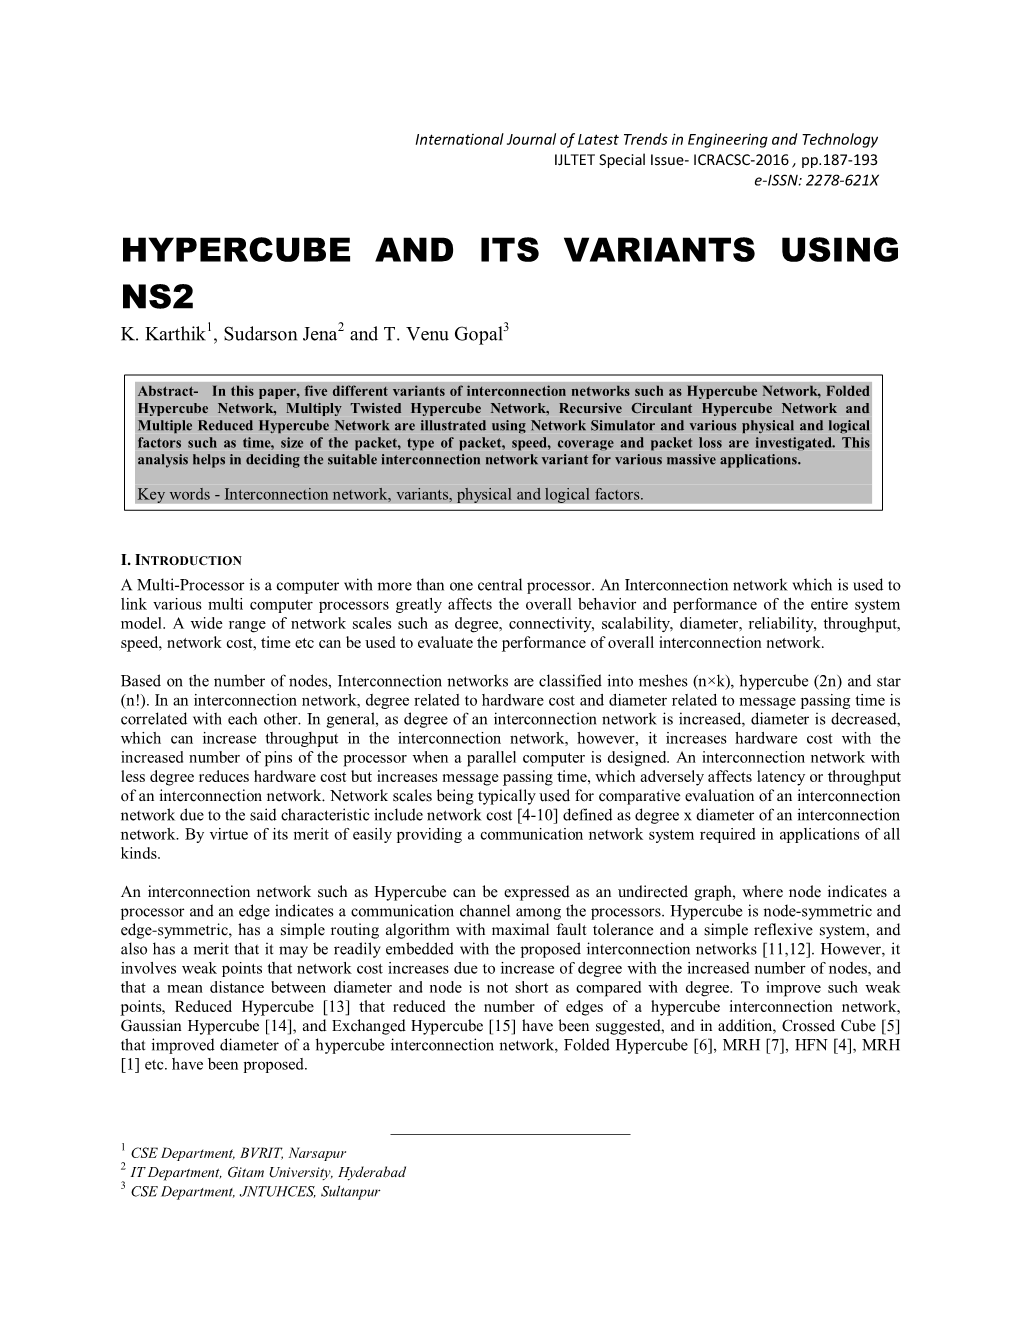 Hypercube and Its Variants Using Ns2